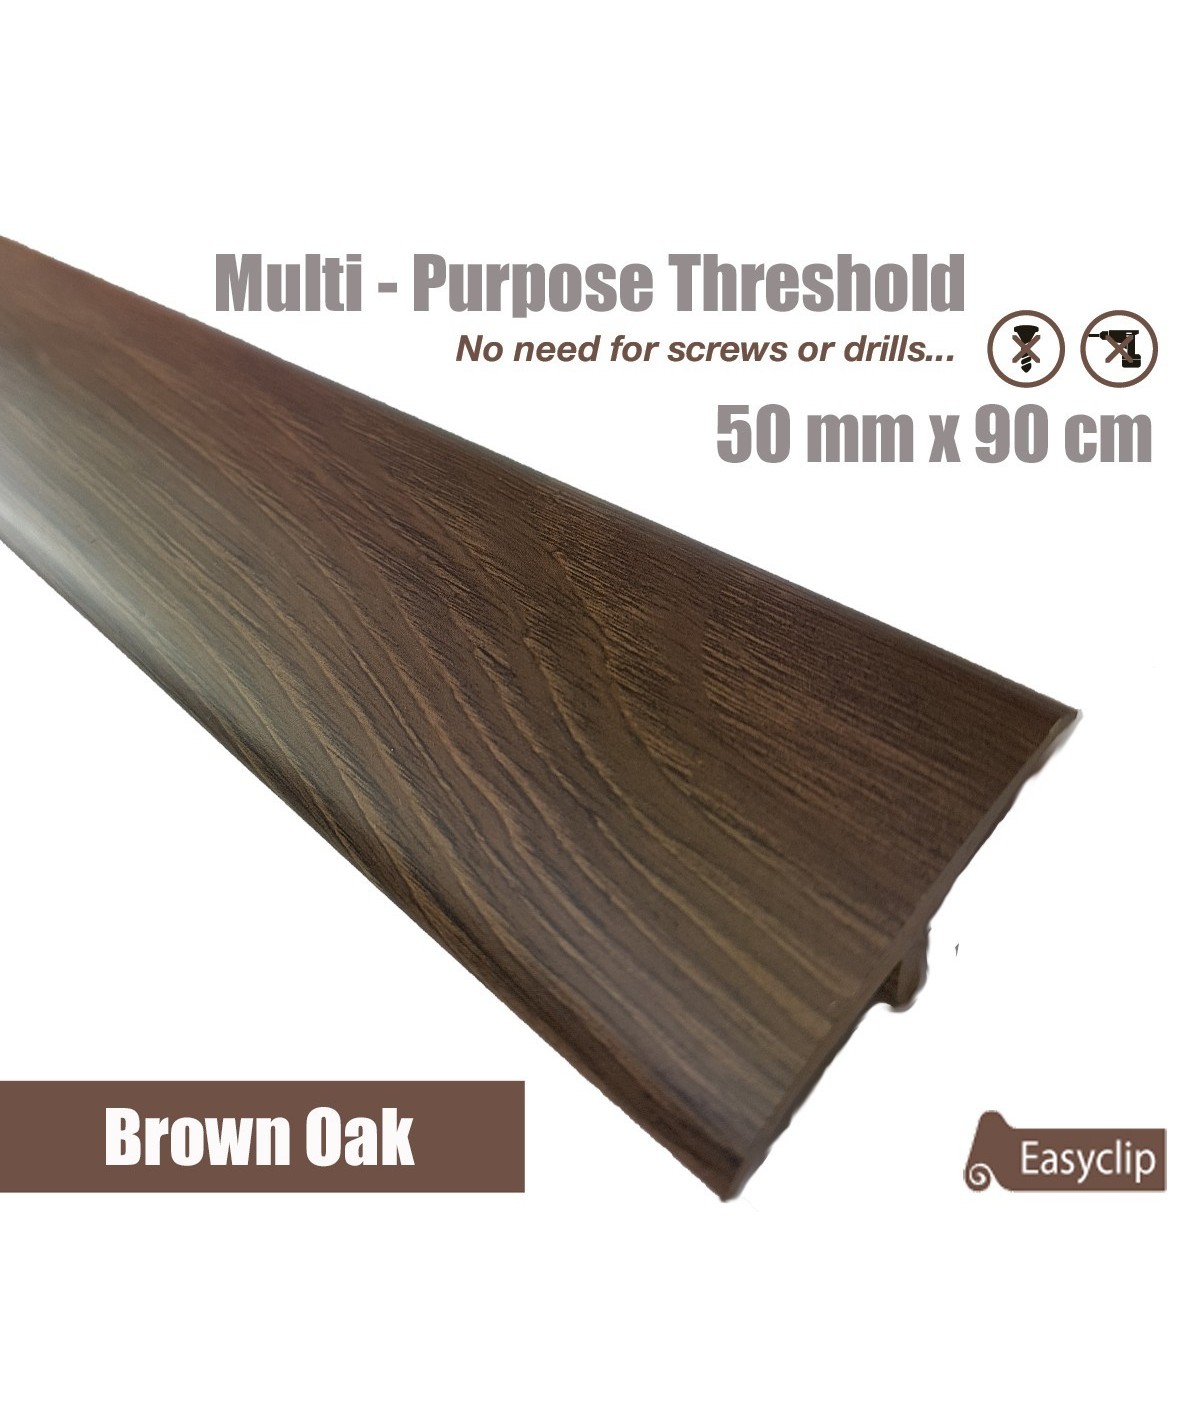 Brown Oak Laminated Transition Threshold Strip 50mm x 90cm Multi-Height/Pivots Catalog   Products